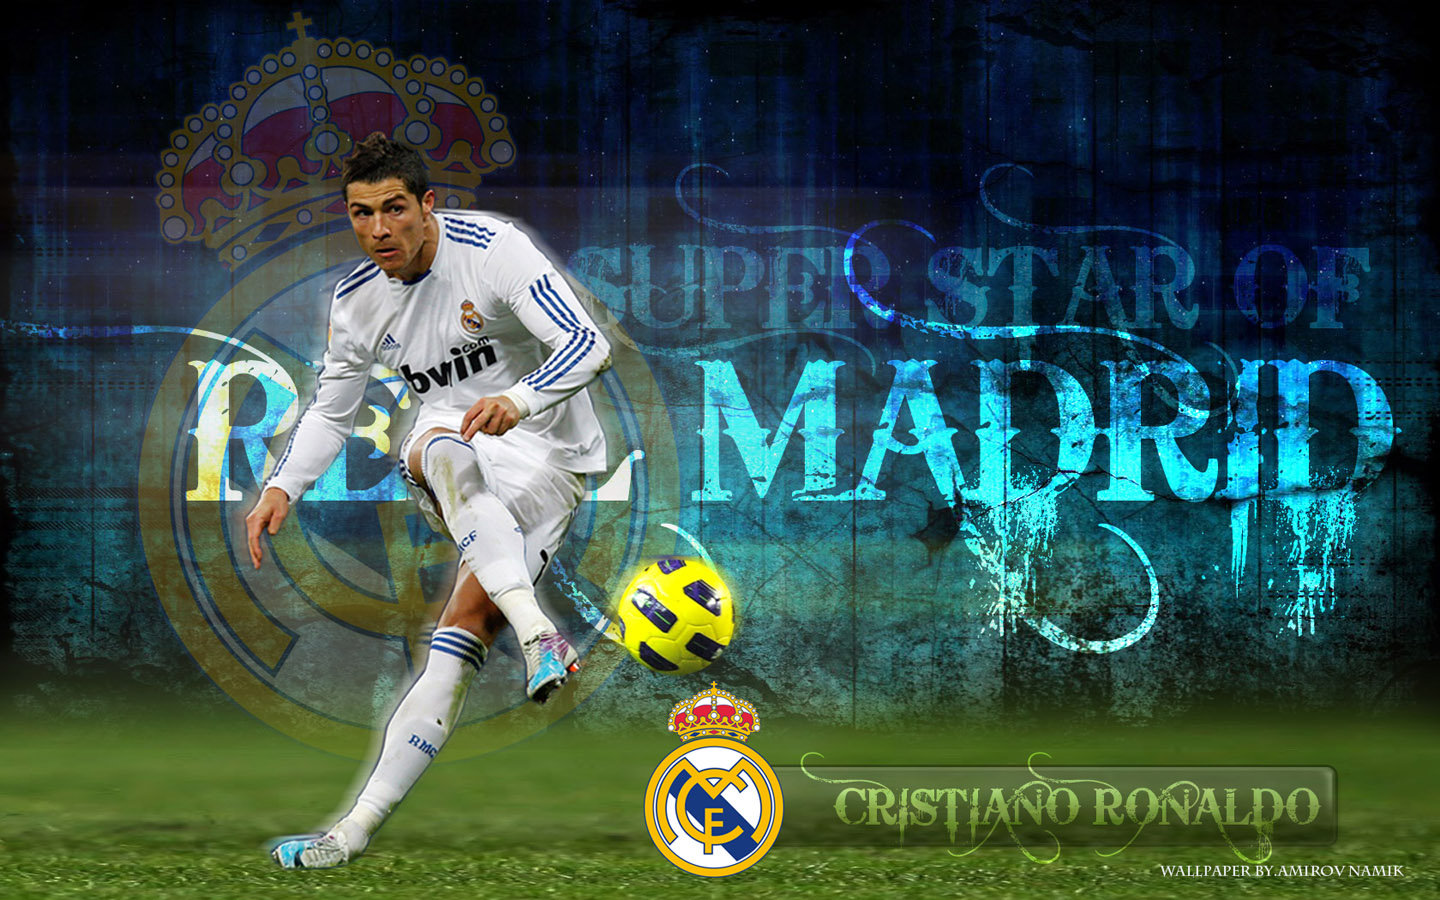 Real Madrid Cr7 Wallpaper Picture On Wallpaper Hd 1440 - Real Madrid  Wallpaper Ronaldo - 1440x900 Wallpaper 